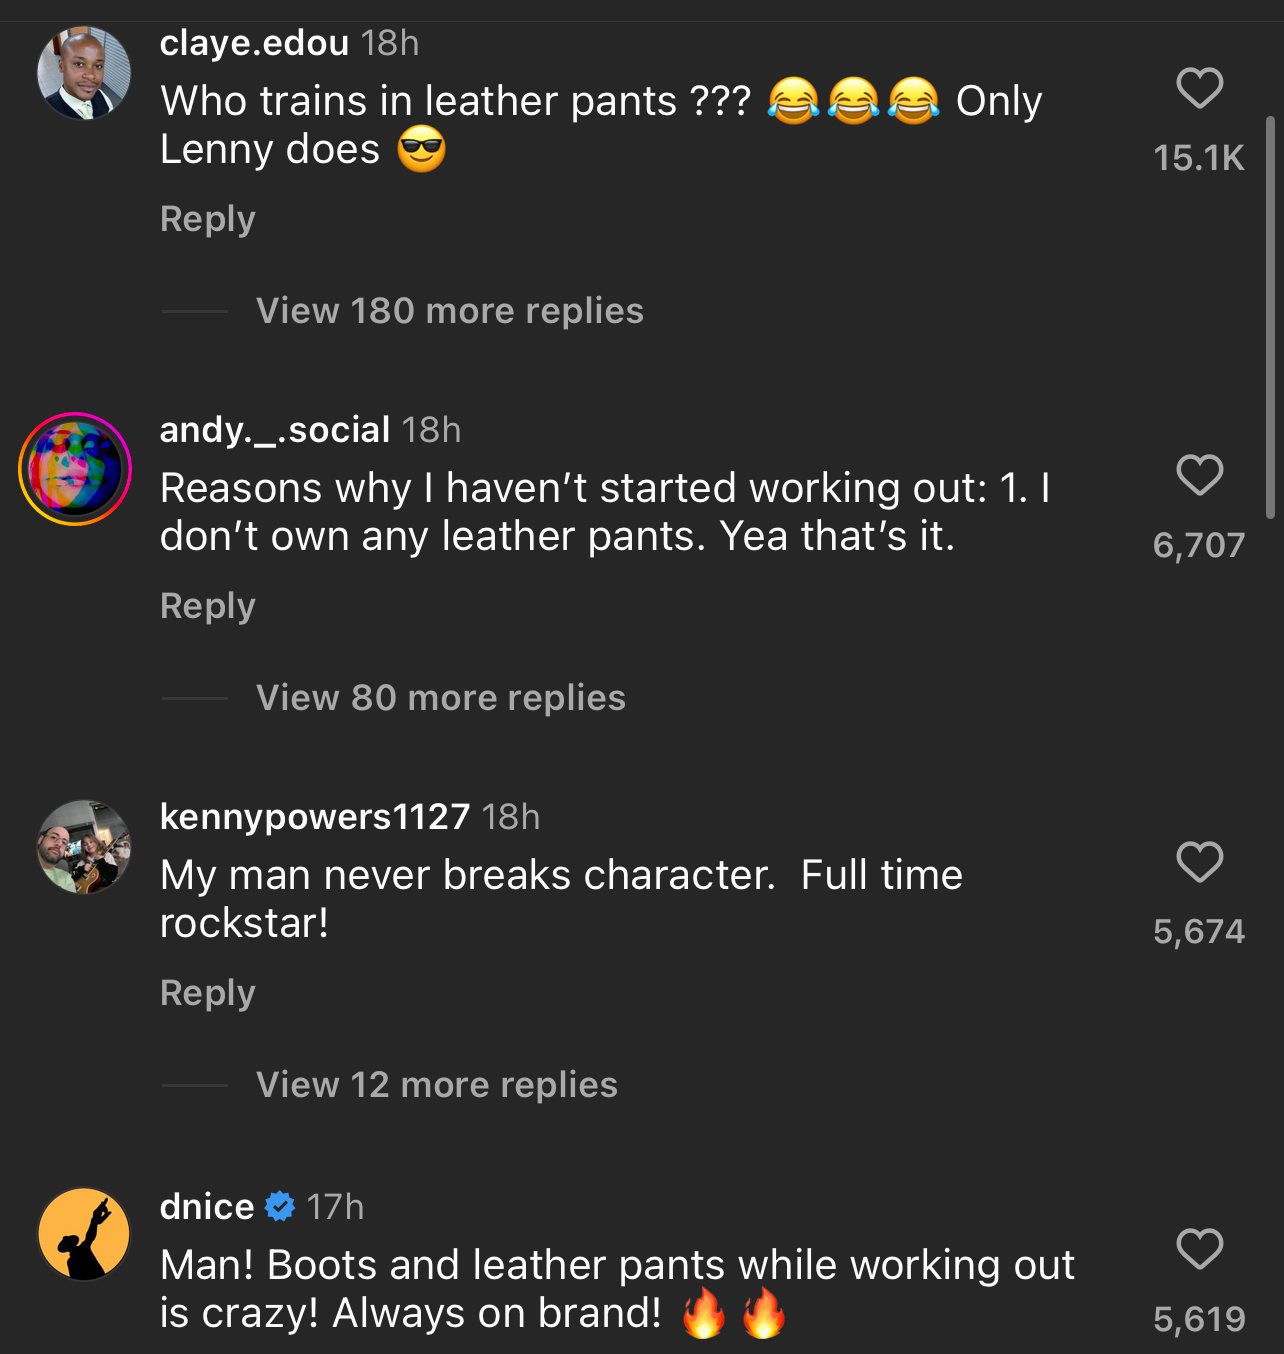 Image of a social media post with a joke about training in leather pants and various user comments